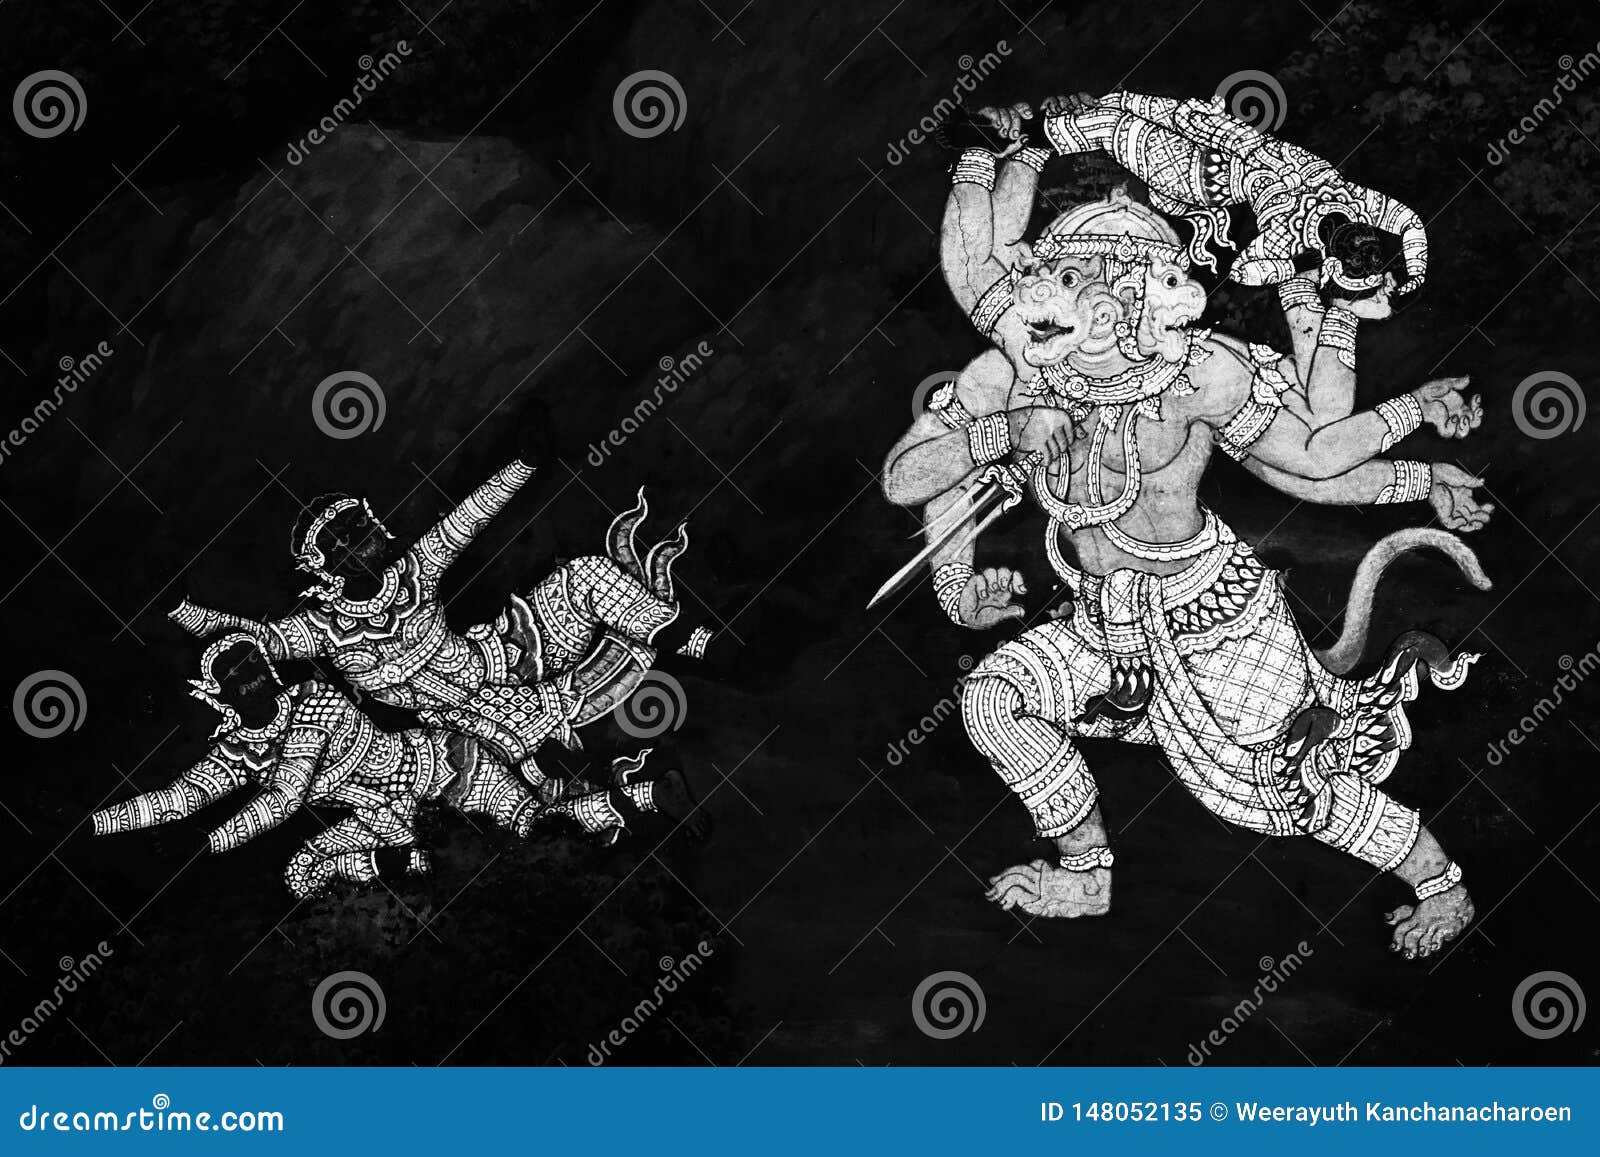 The Ramakian Ramayana Mural Paintings Are Black And White